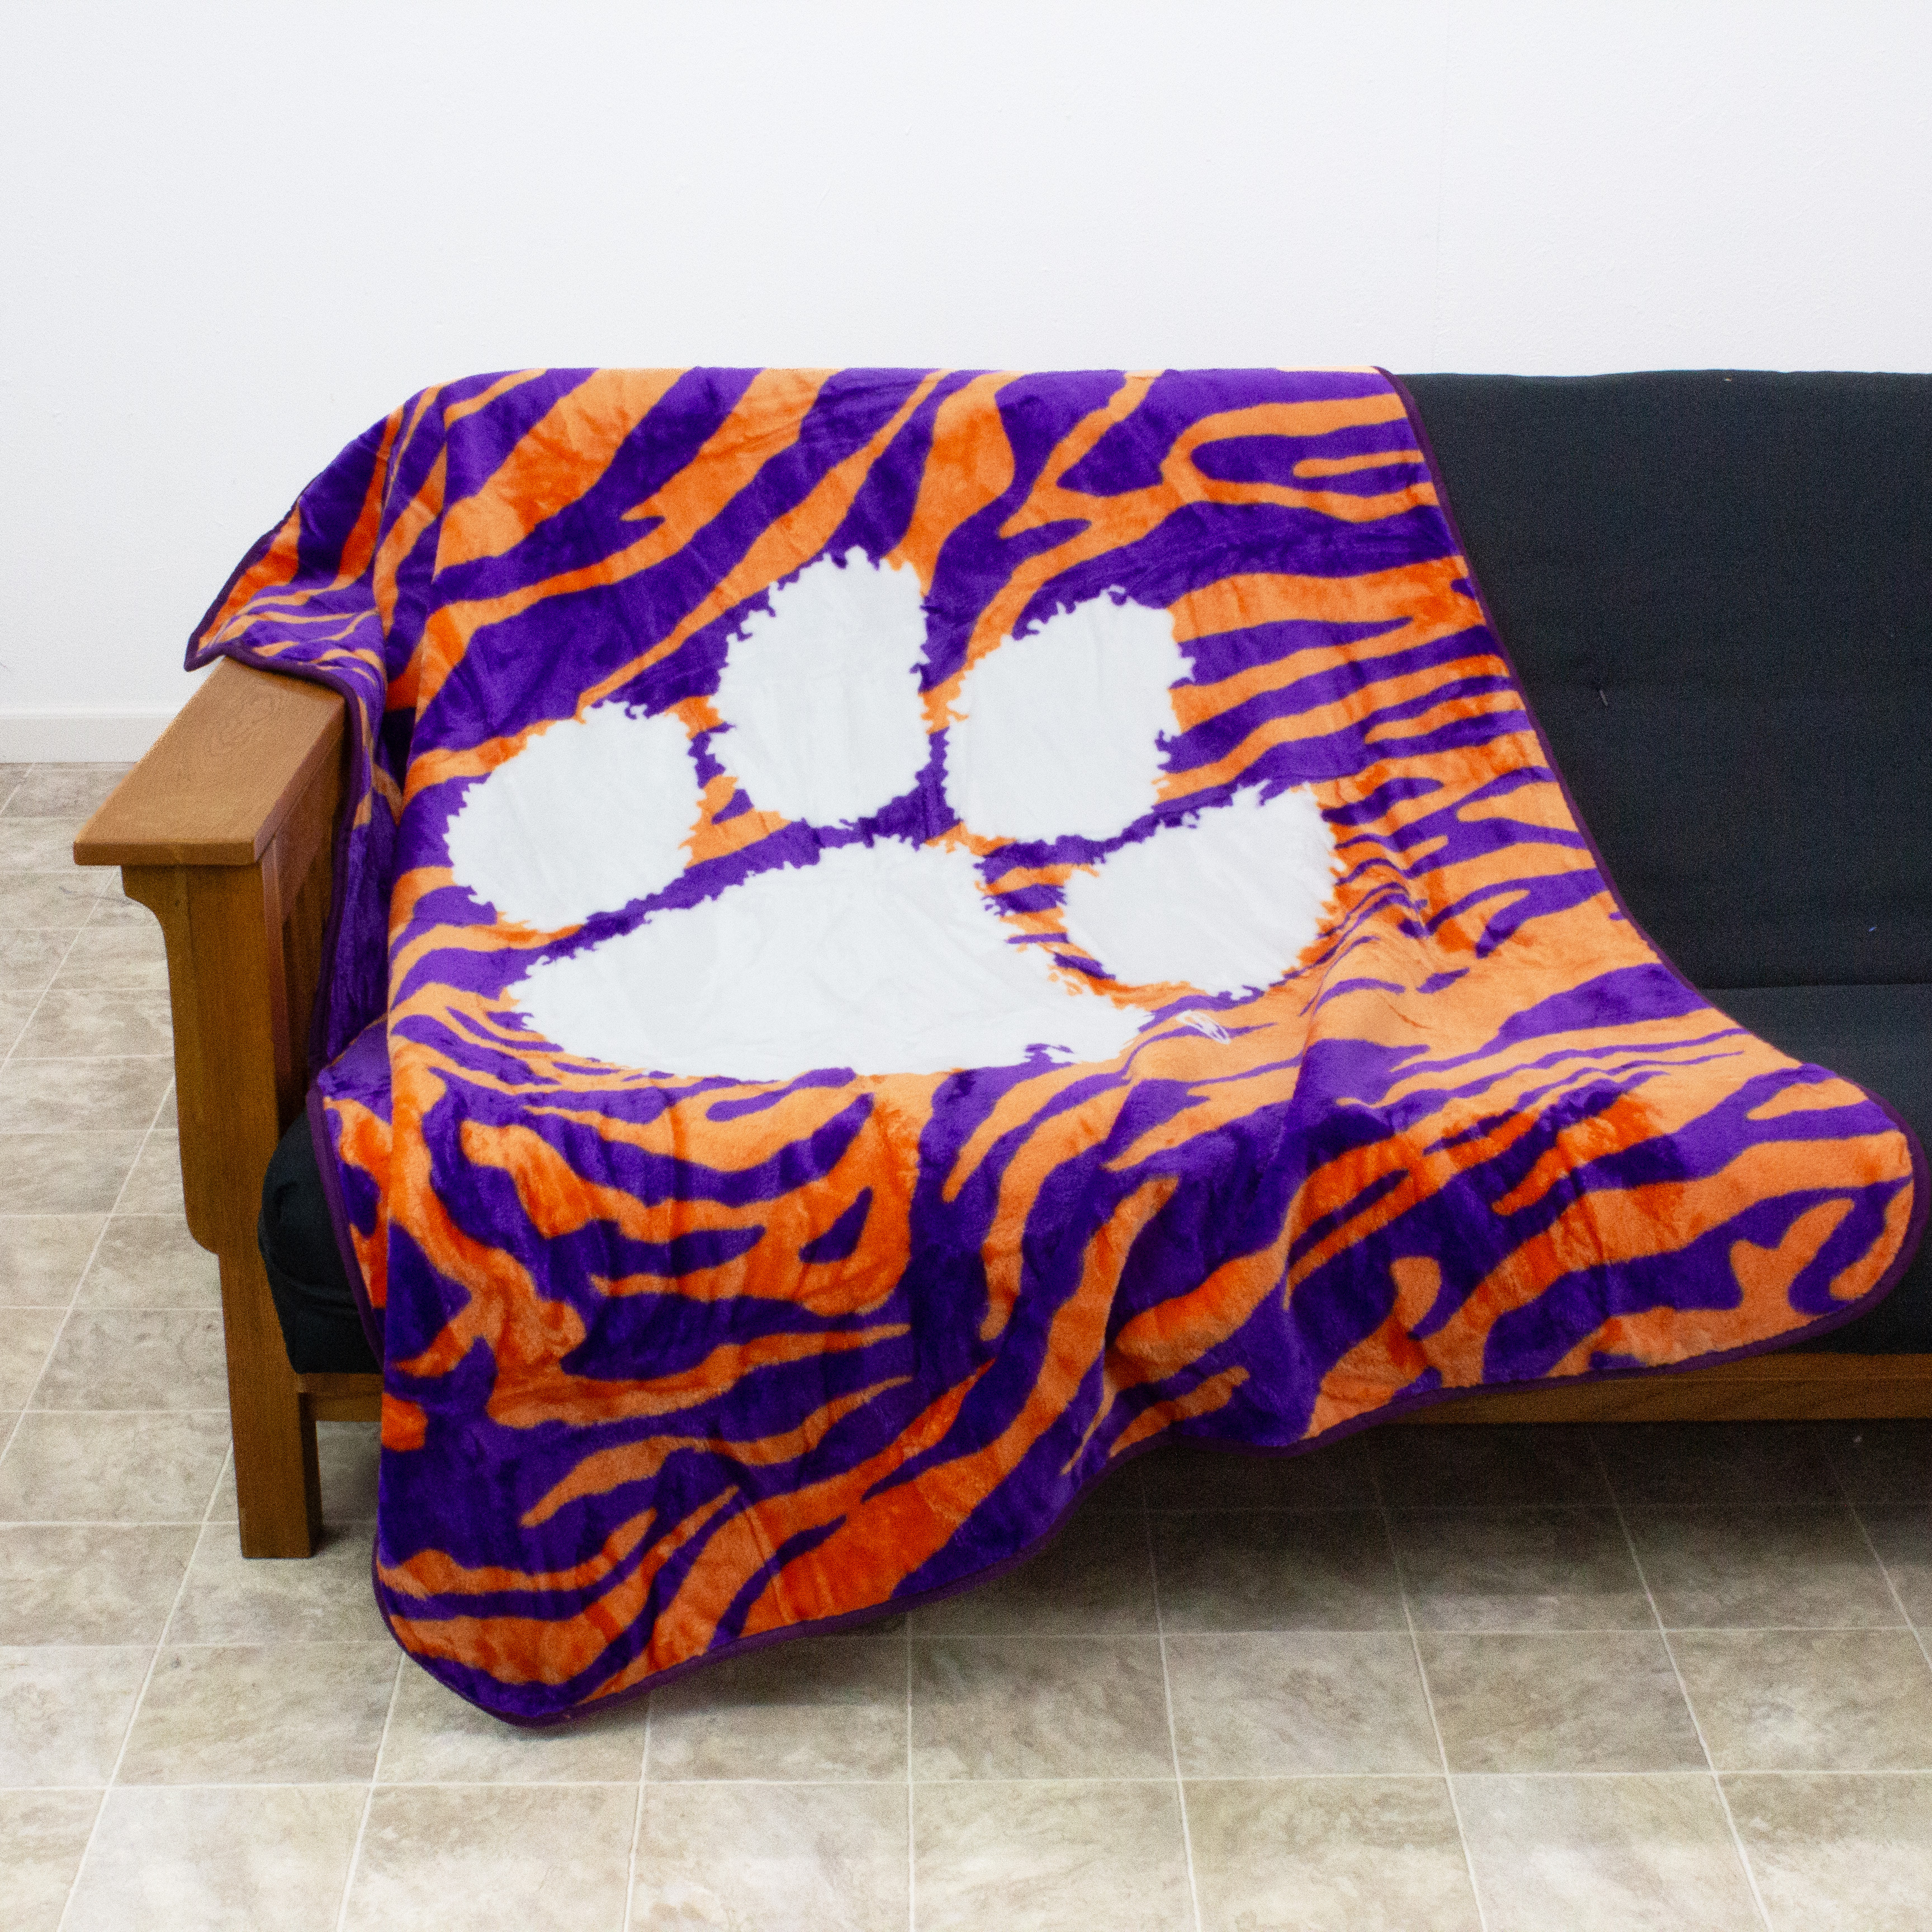 College Covers Everything Comfy Clemson Tigers Soft Raschel Throw Blanket, 60" x 50" - image 3 of 8